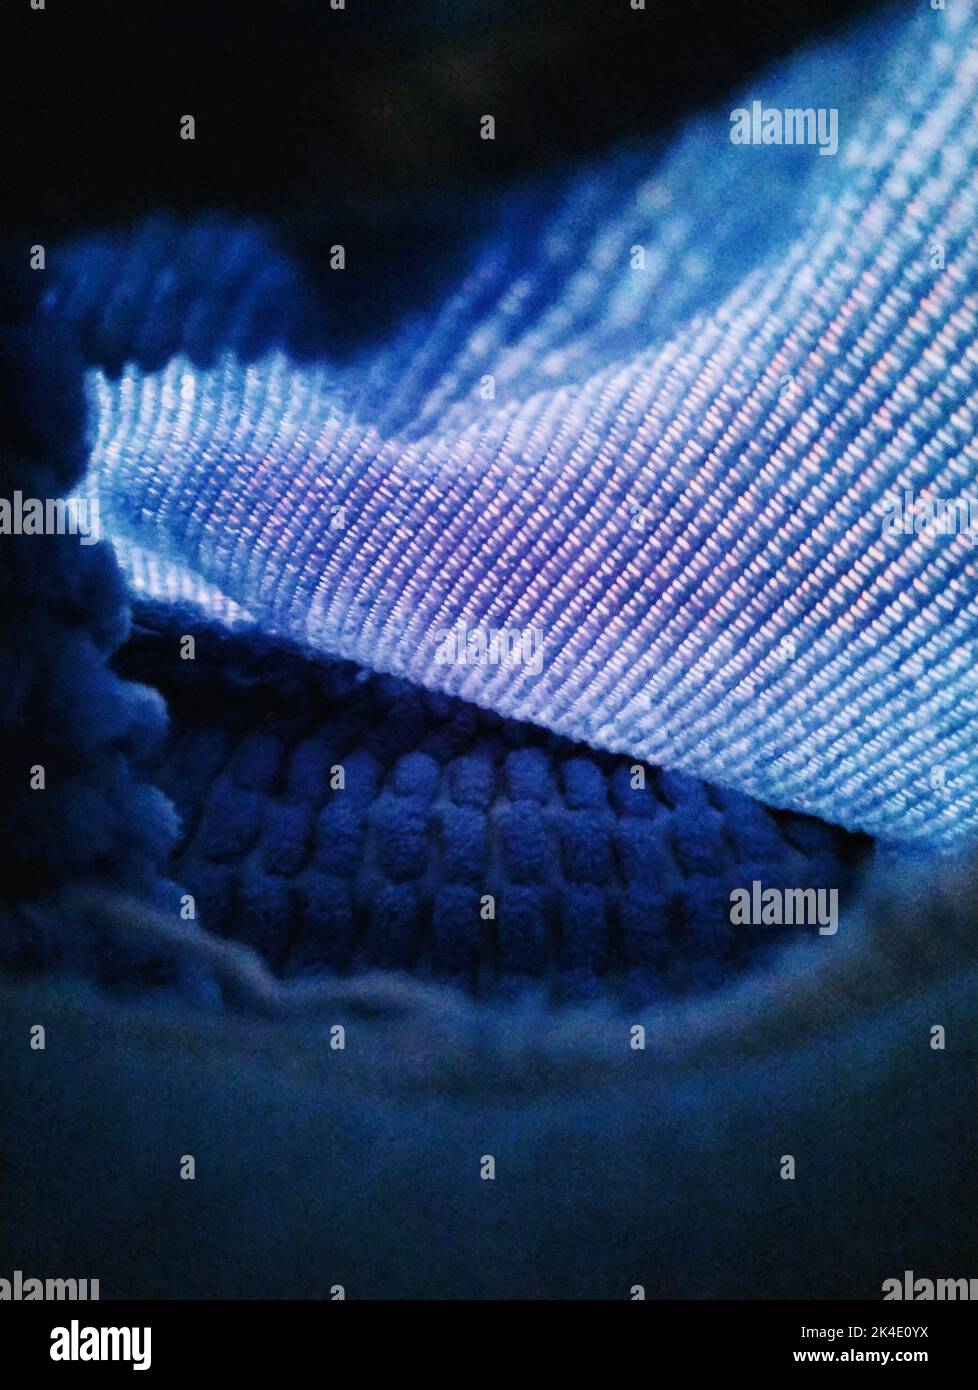 A vertical closeup of a blue knitted fabric illustrated above with blurred background Stock Photo